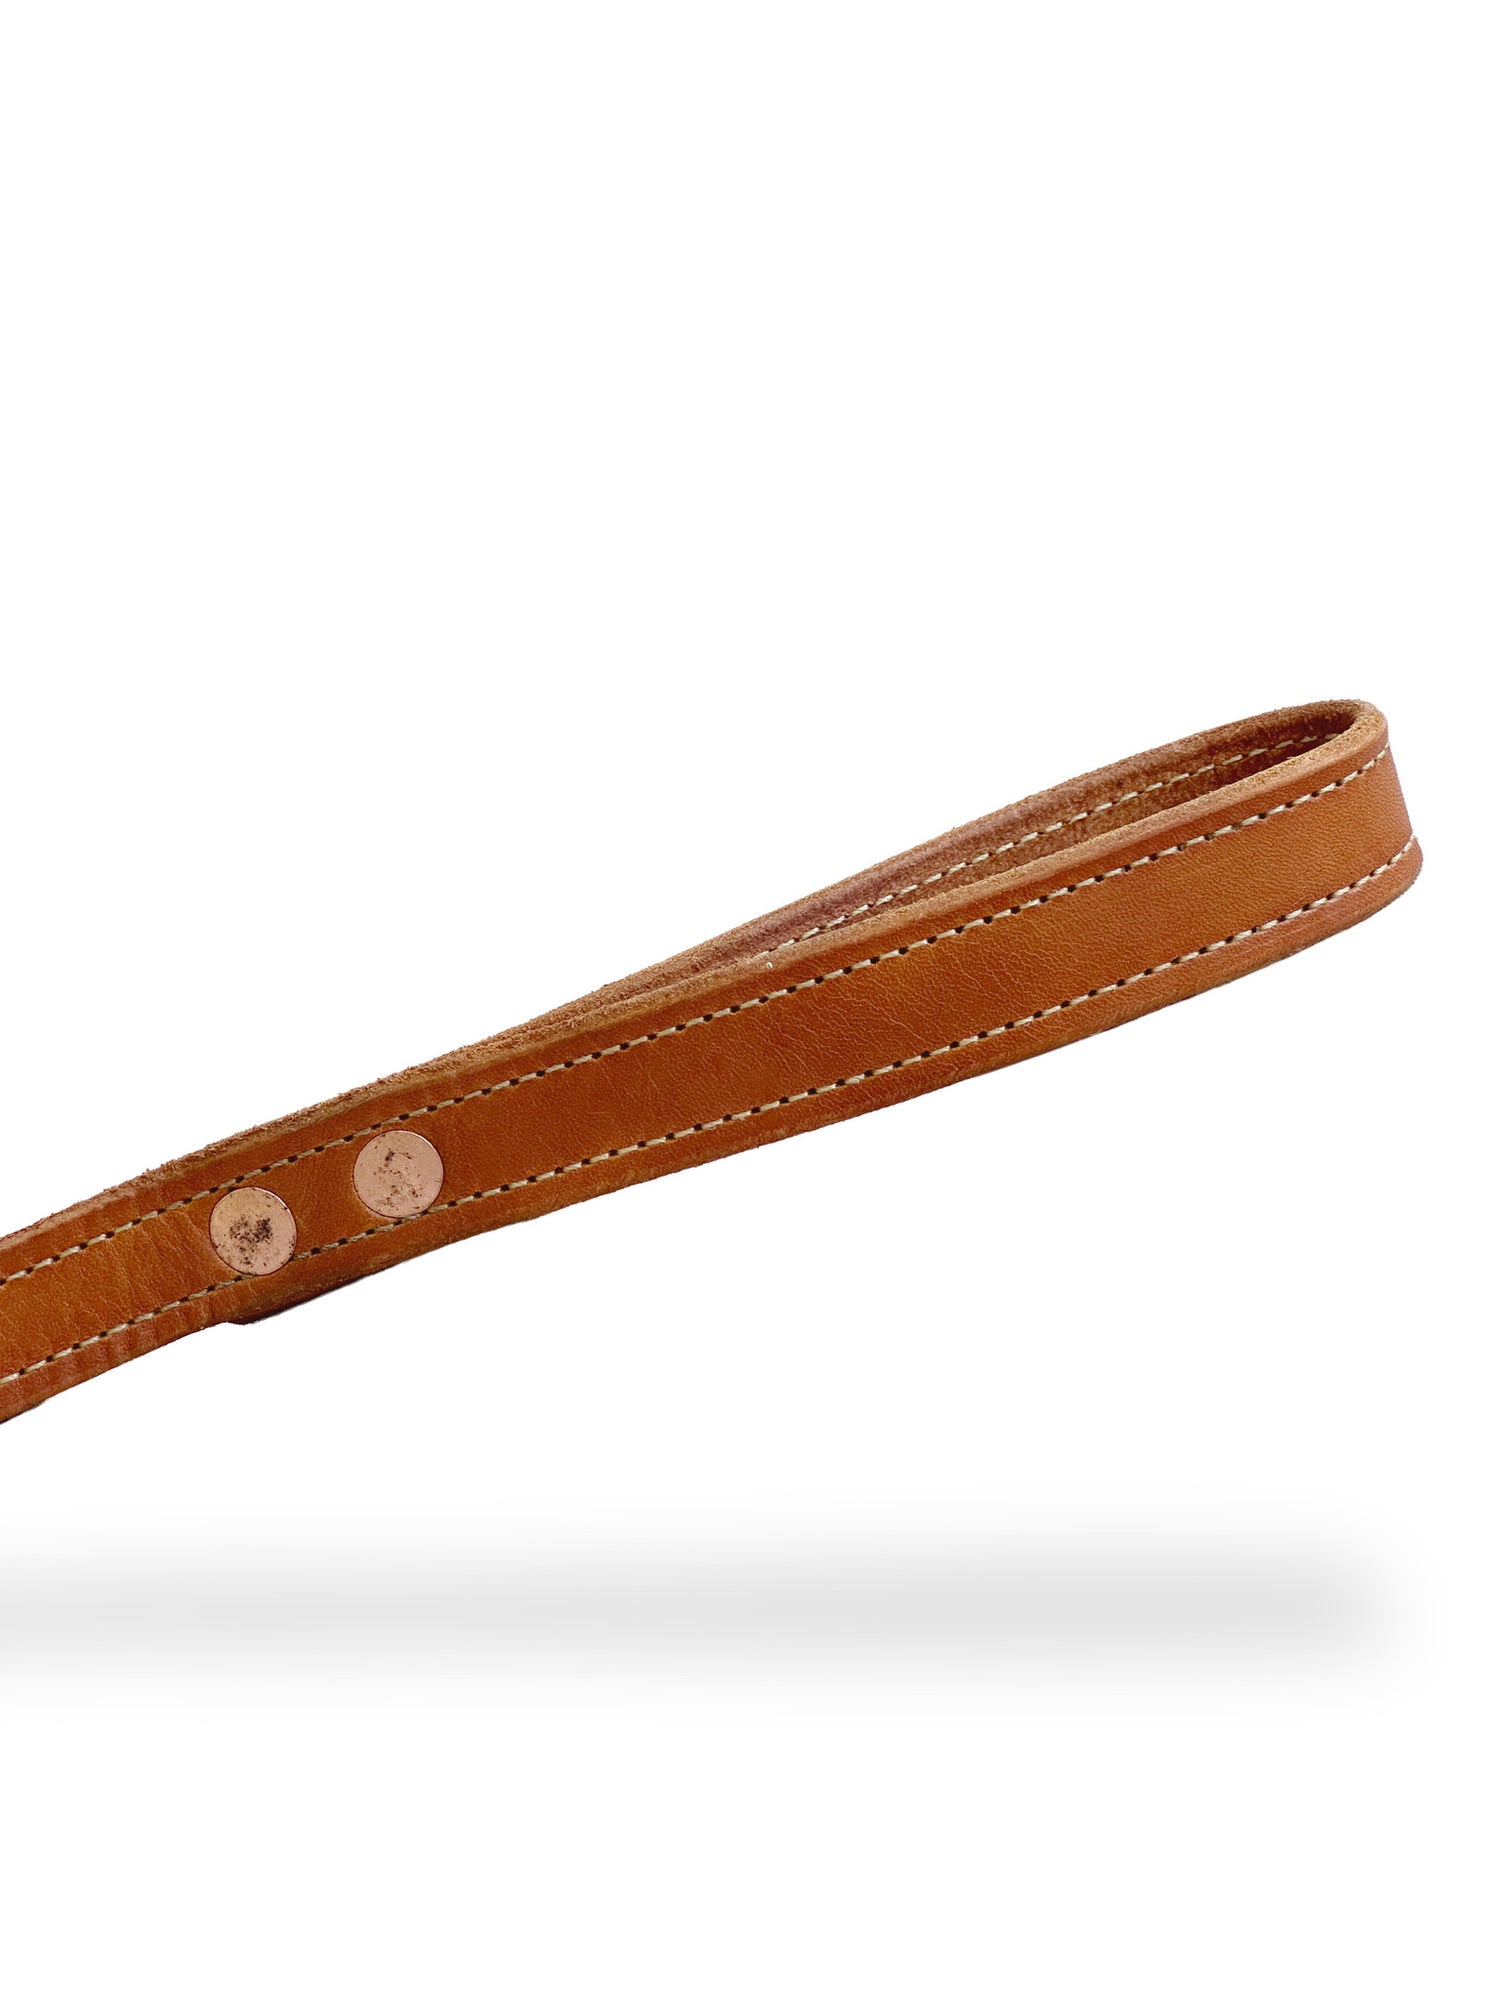 Leather Dog Leash With Stitching